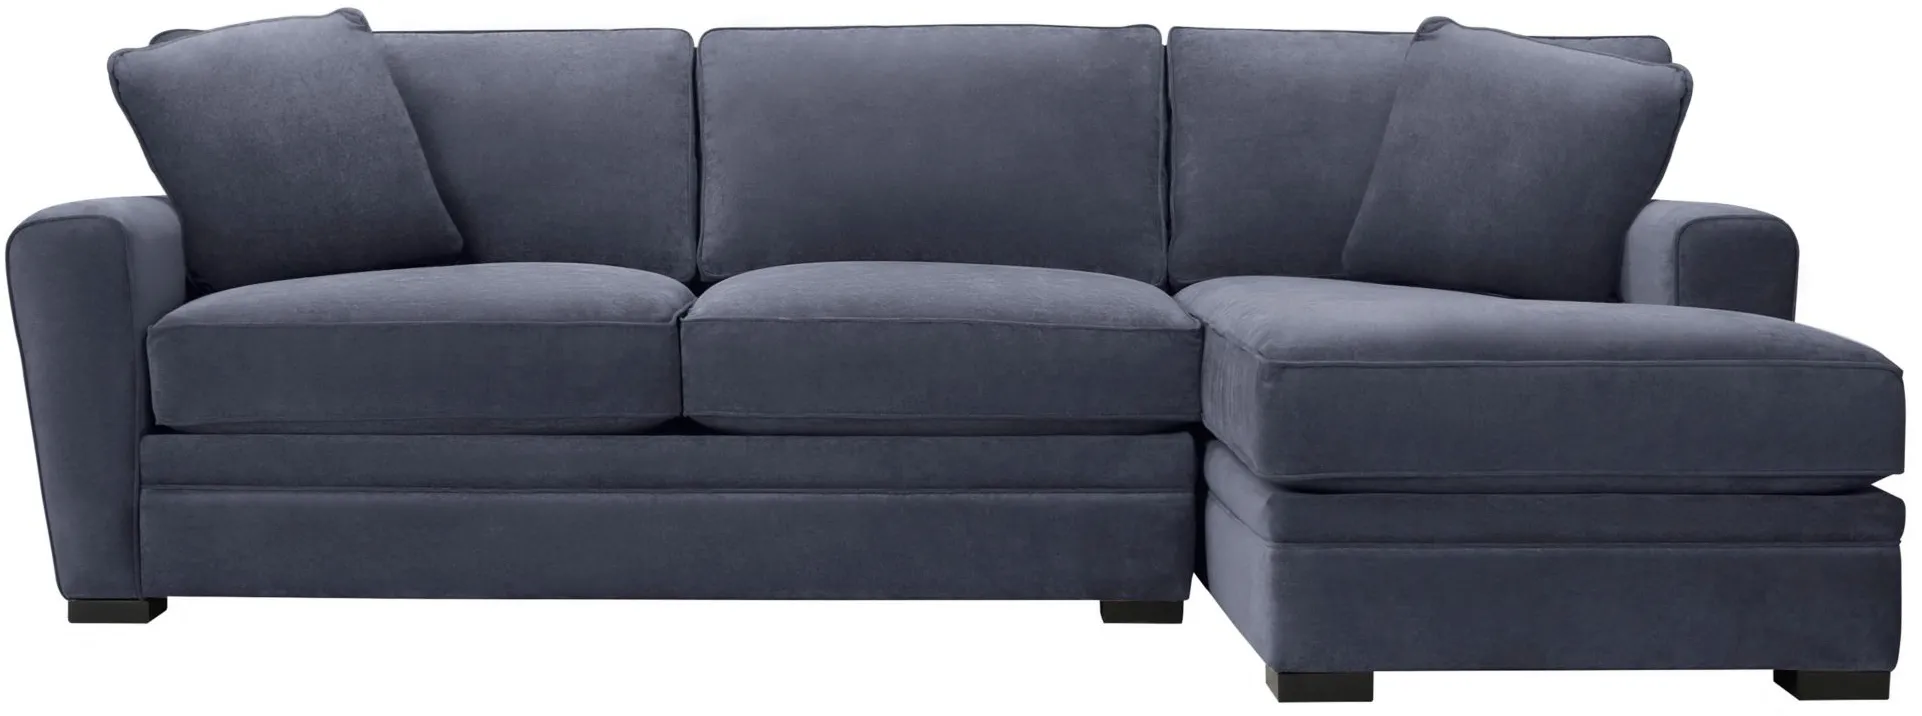 Artemis II 2-pc. Full Sleeper Right Hand Facing Sectional Sofa in Gypsy Slate by Jonathan Louis